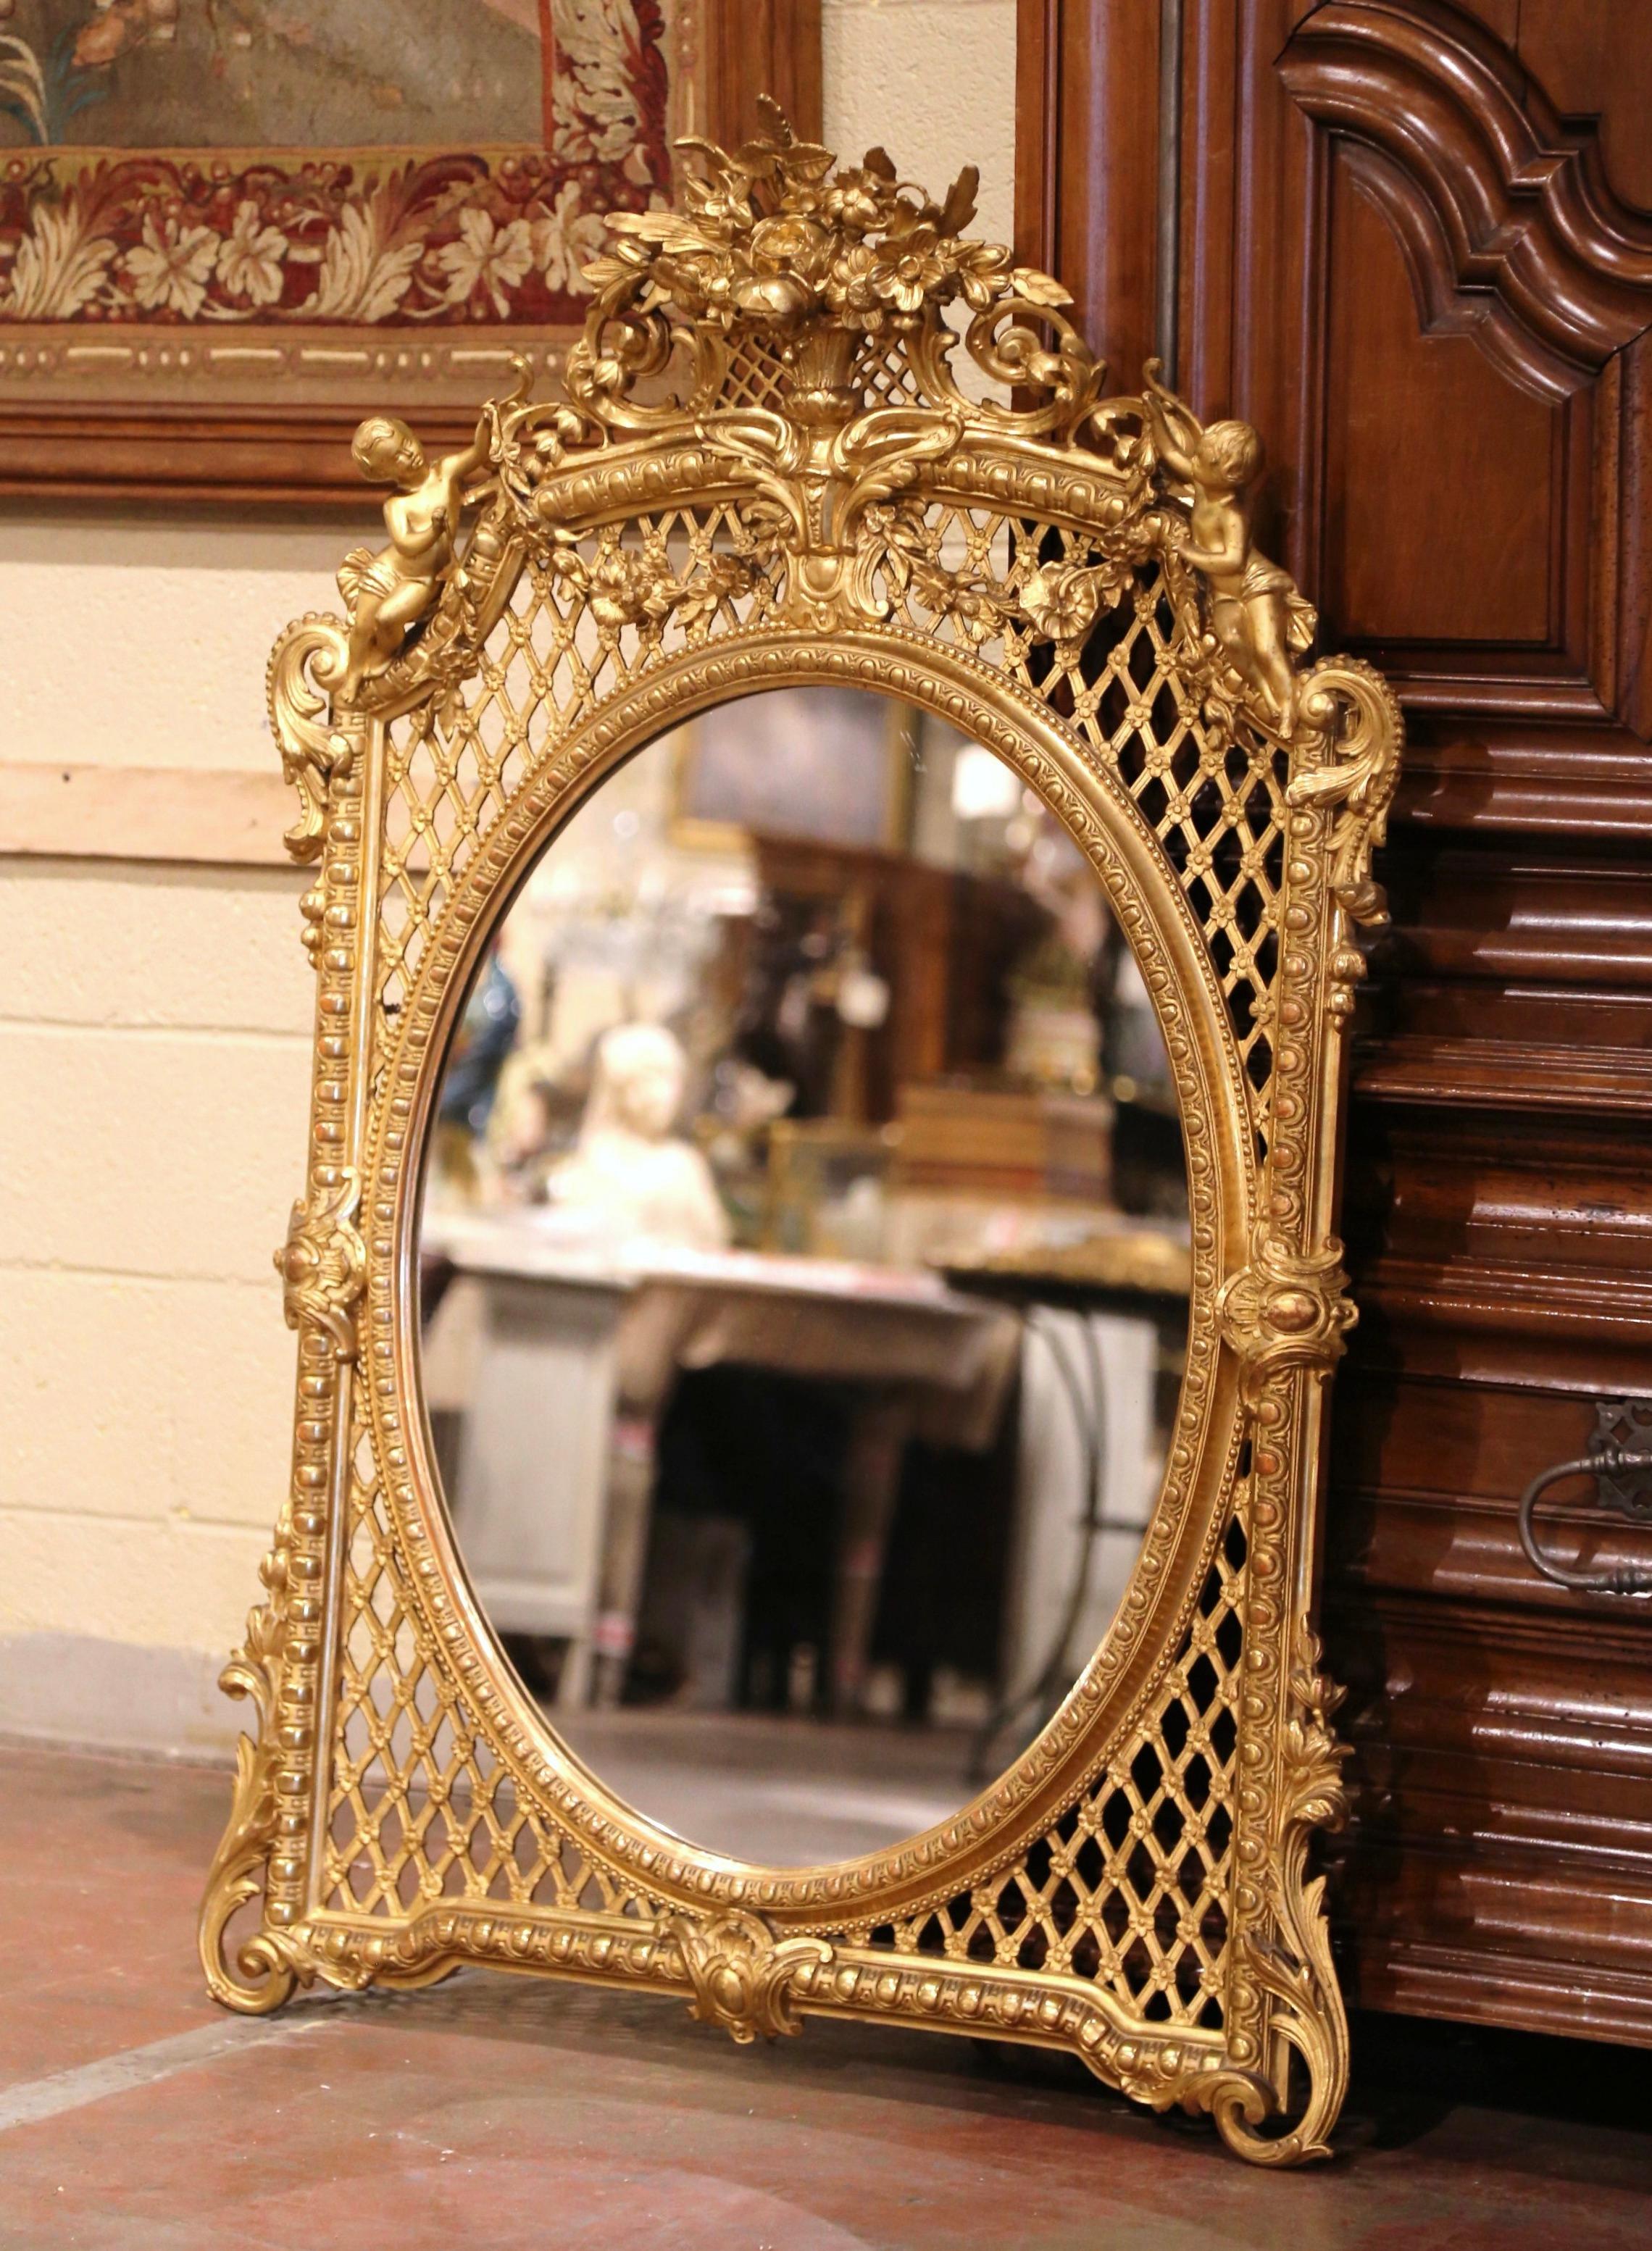 Dress a mantel with this elegant antique gilt mirror. Crafted in Provence, Southern France, circa 1850, and arched at the top, the ornate frame features a pierced floral decor cartouche at the pediment flanked with leaves and foliage motifs and